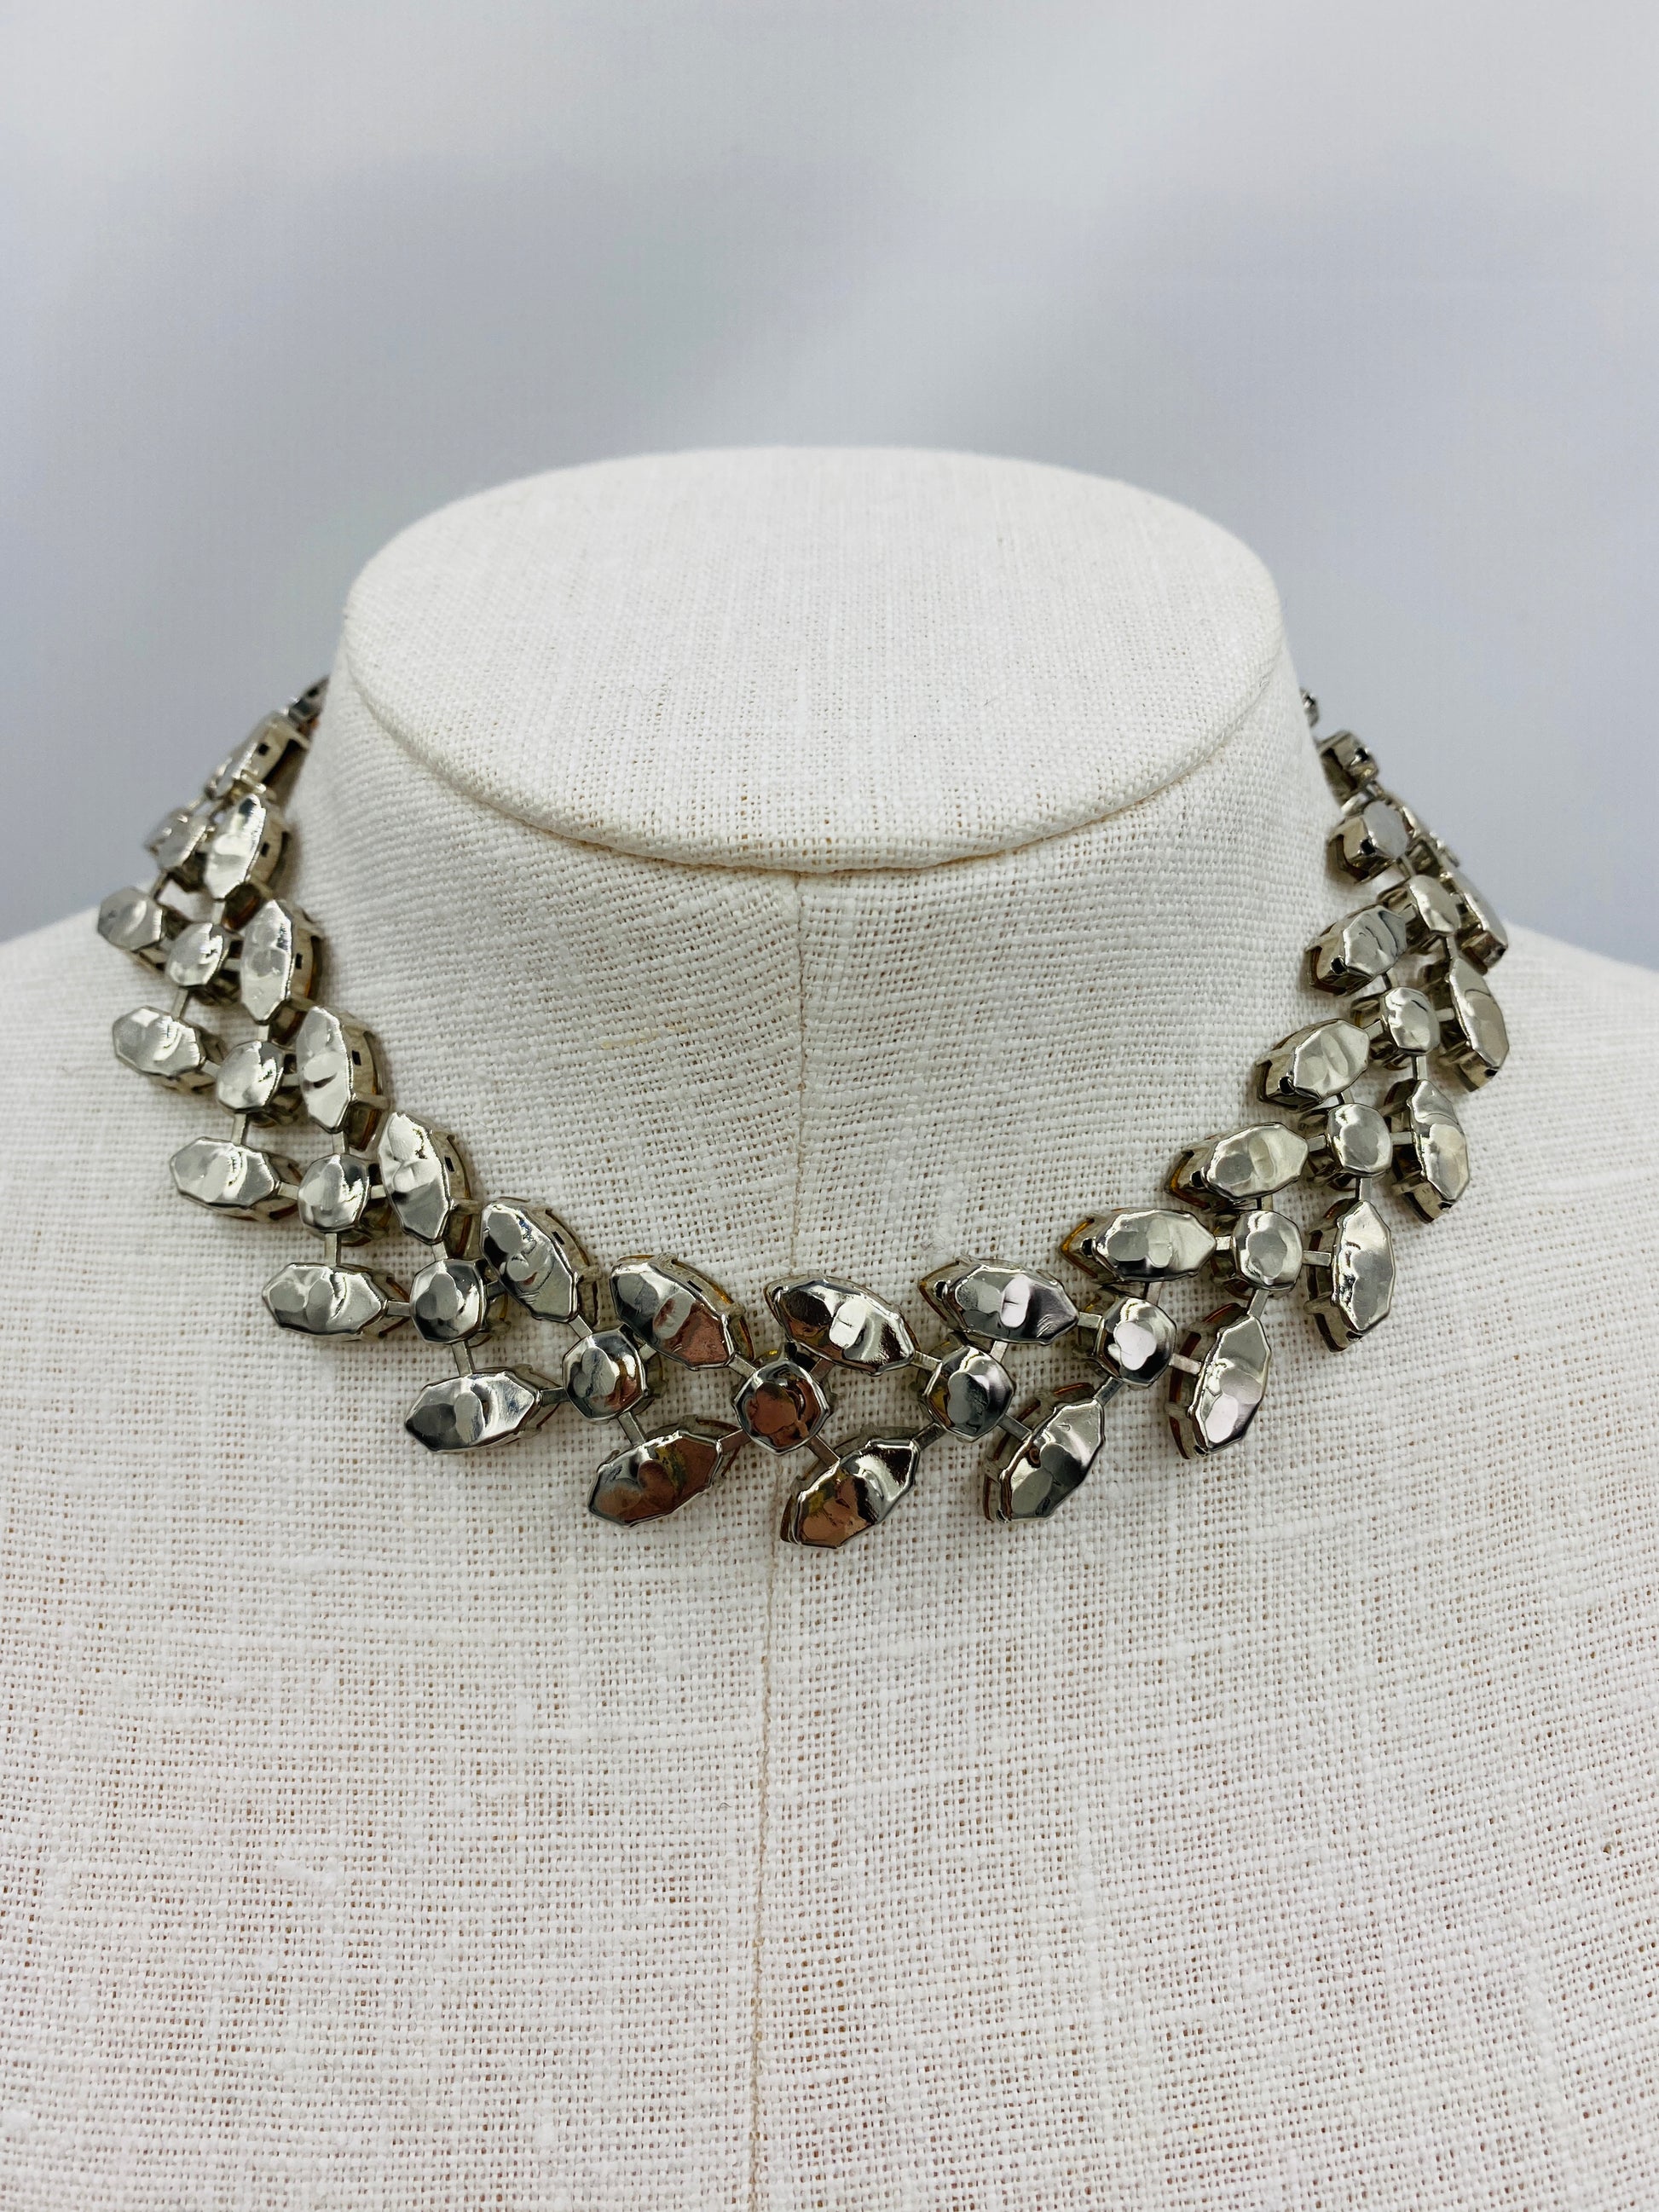 Underside of Vintage 1950s Crystal Marquise Rhinestone Choker Necklace showing silver metal. 